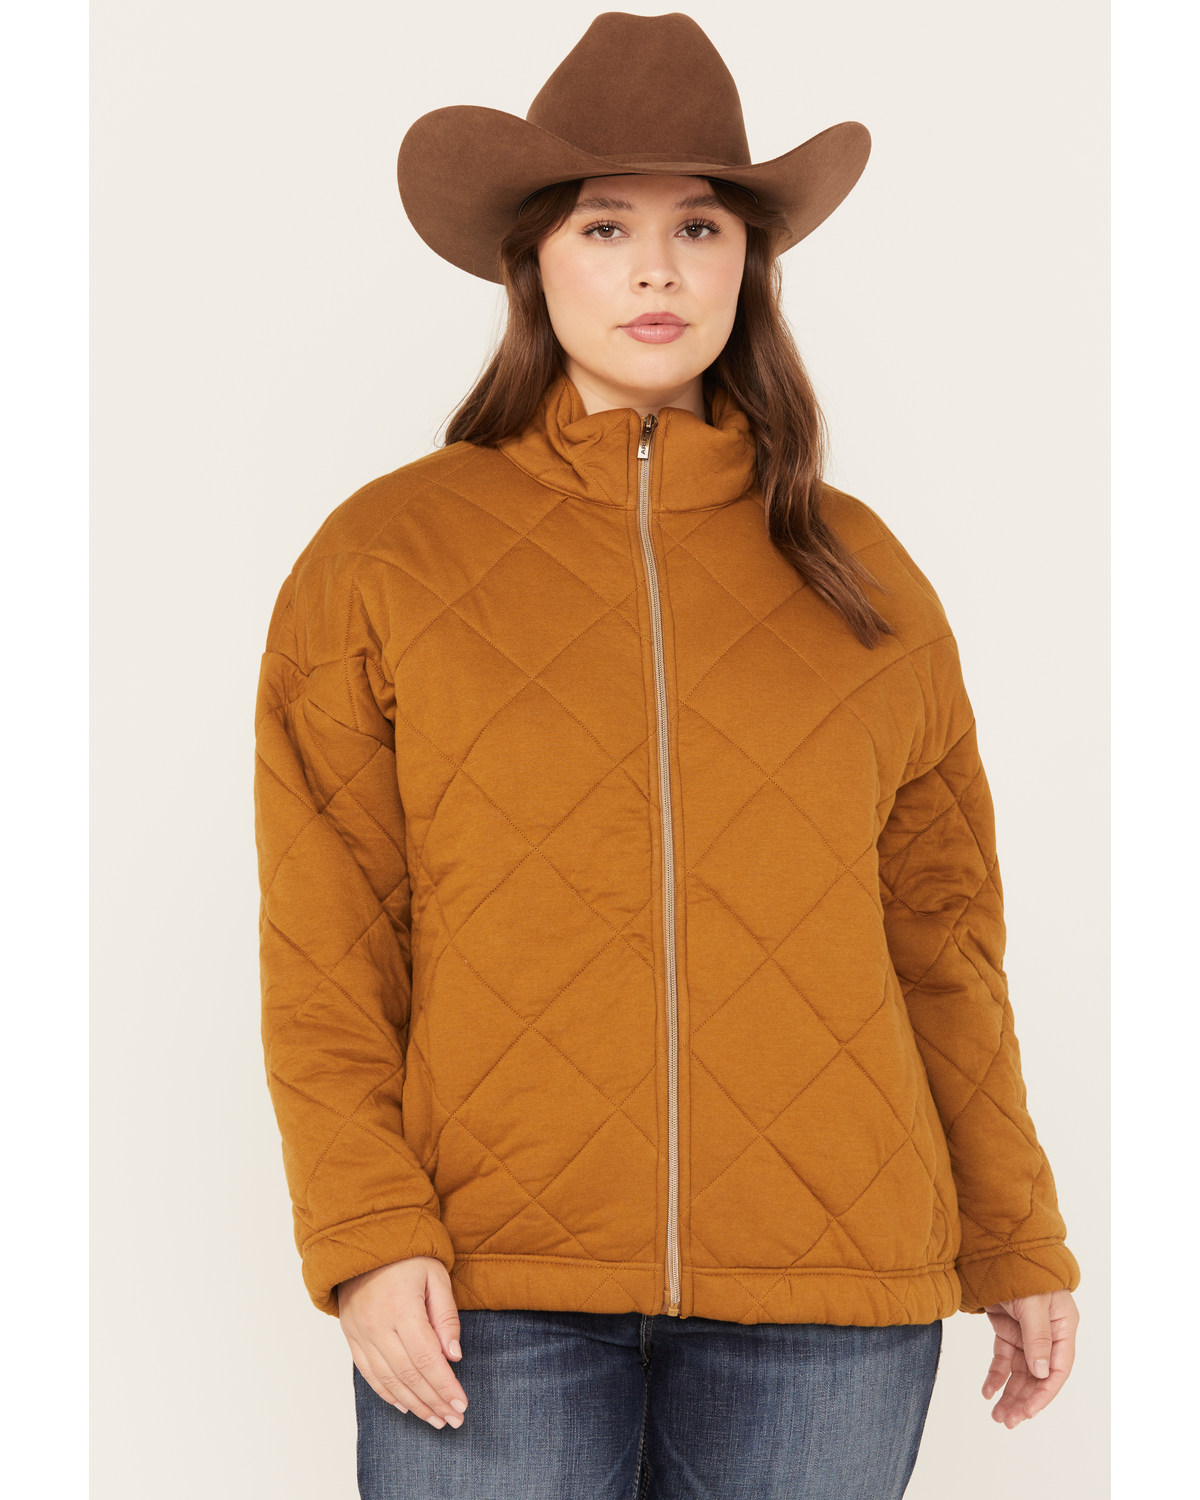 Ariat Women's R.E.A.L. Quilted Zip Jacket - Plus